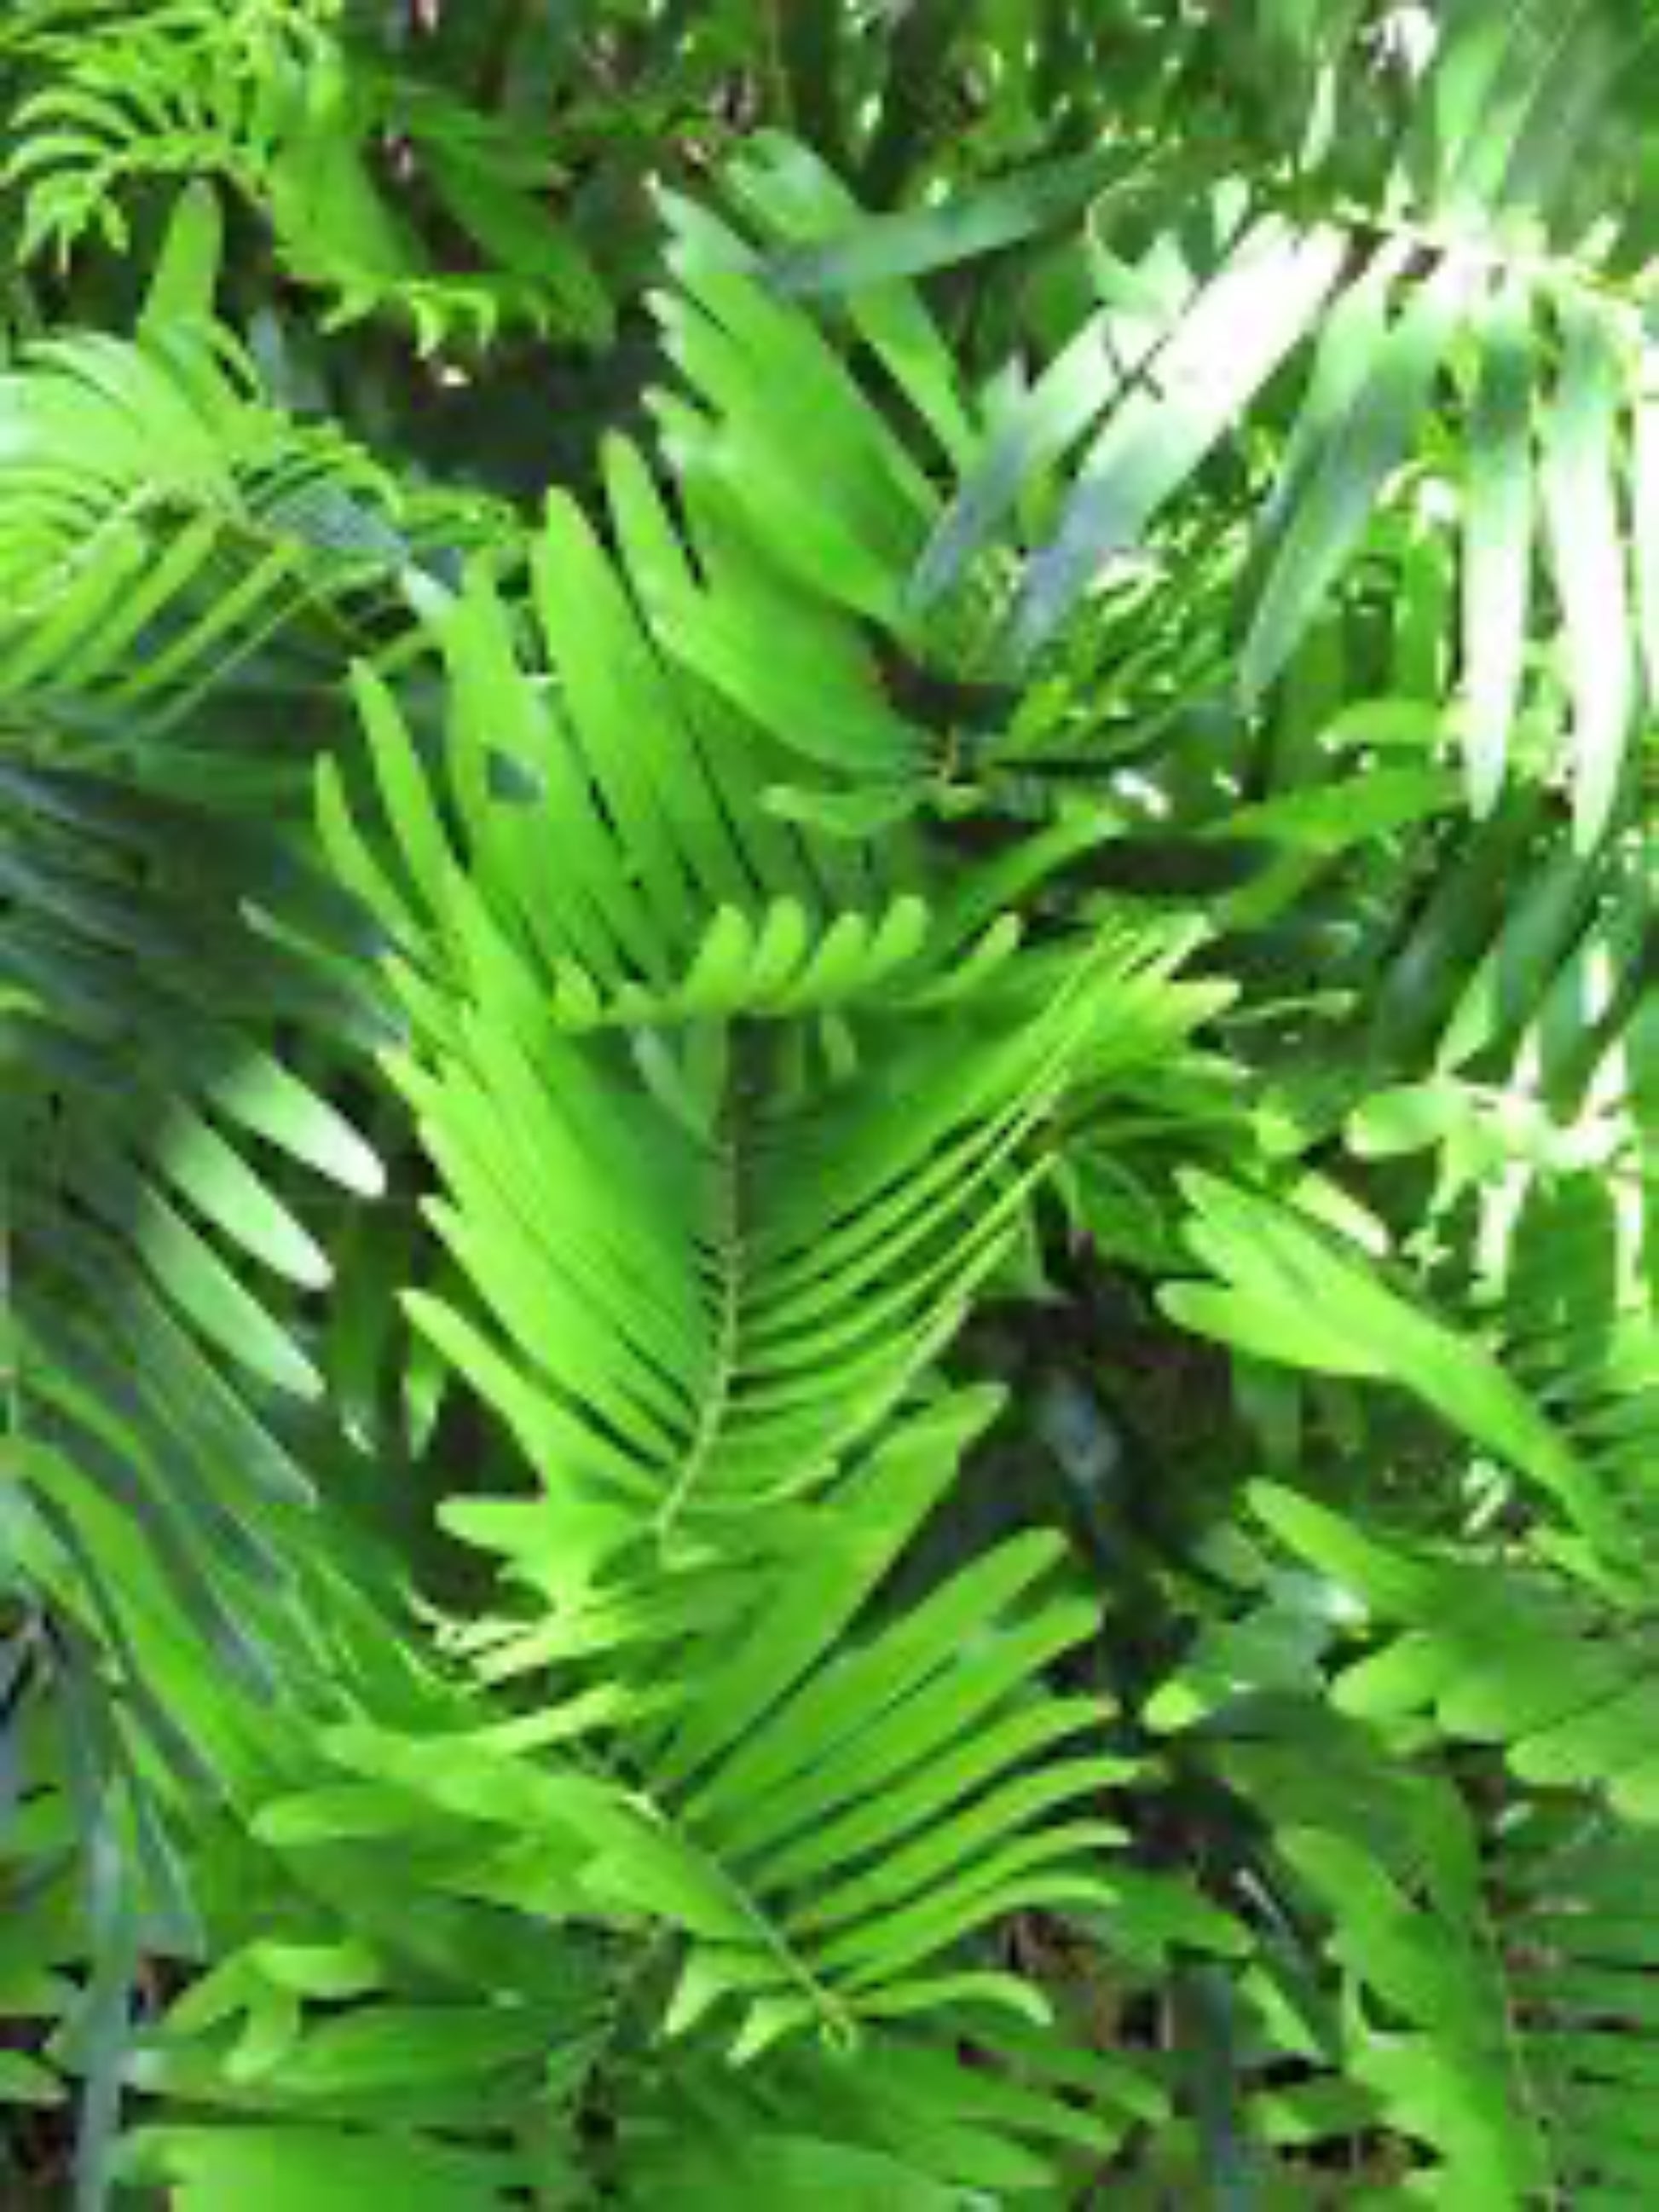 zamia intergrifolia " coontie" is the host plant for Atala butterfly